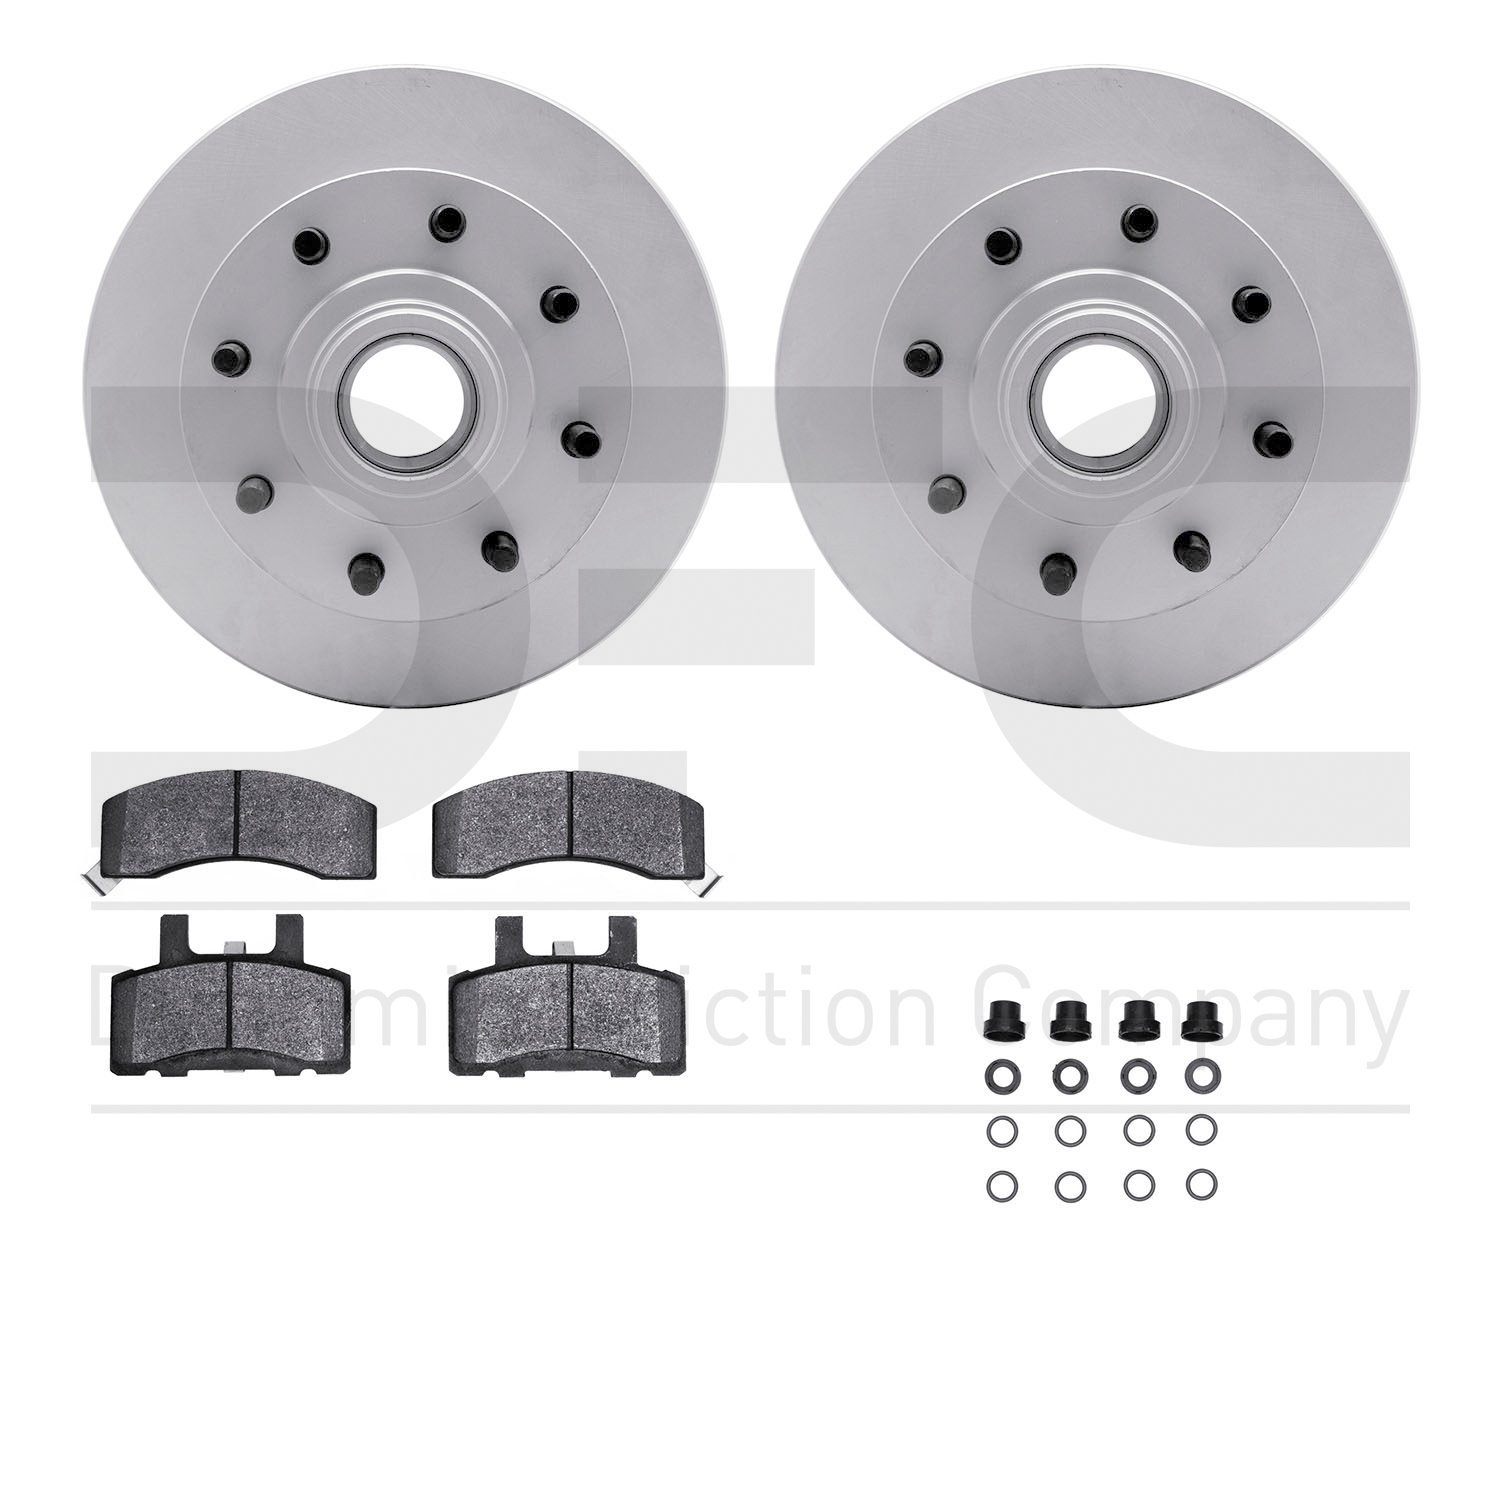 4412-48009 Geospec Brake Rotors with Ultimate-Duty Brake Pads & Hardware, 1992-2002 GM, Position: Front